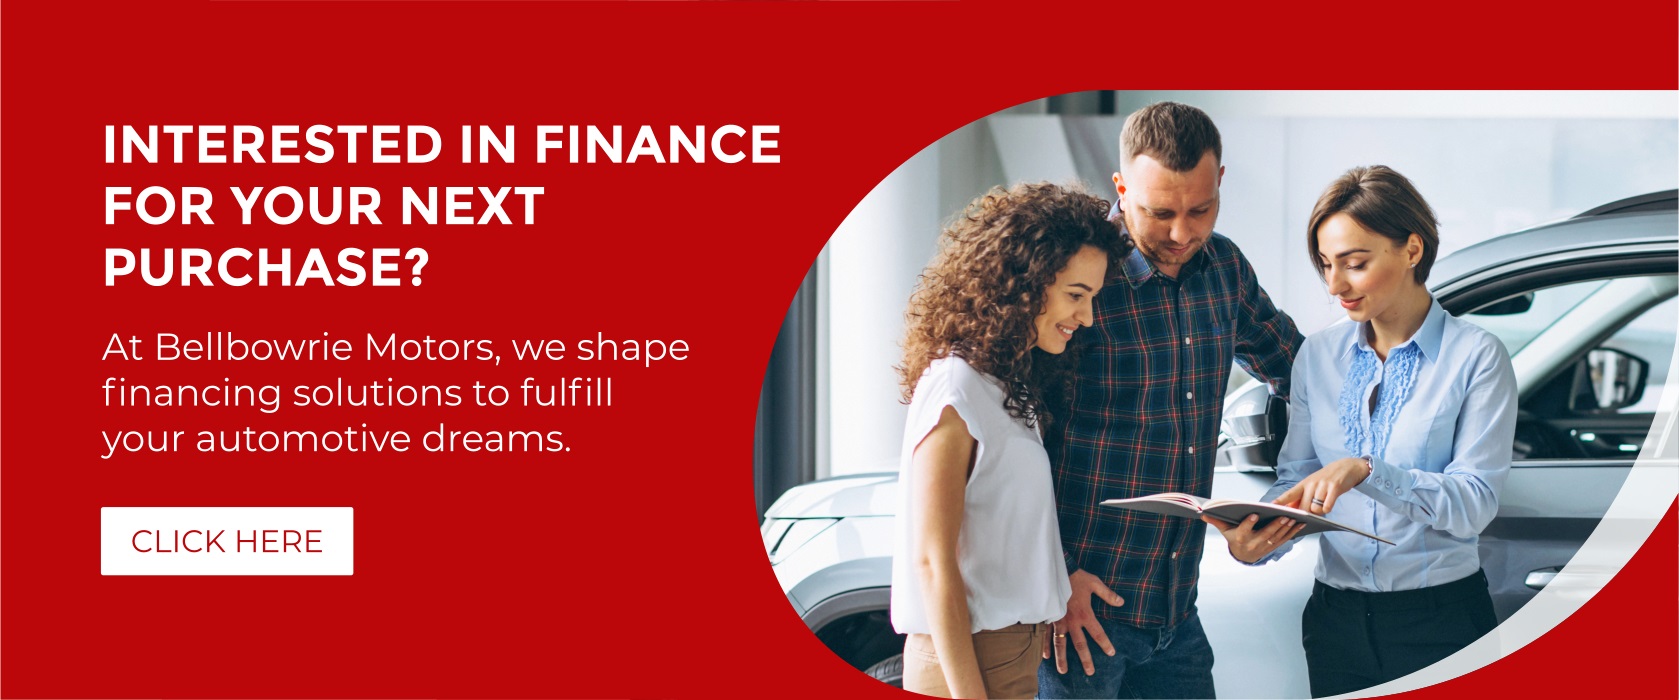 Bellbowrie Motors - Interested in finance for your next purchase?